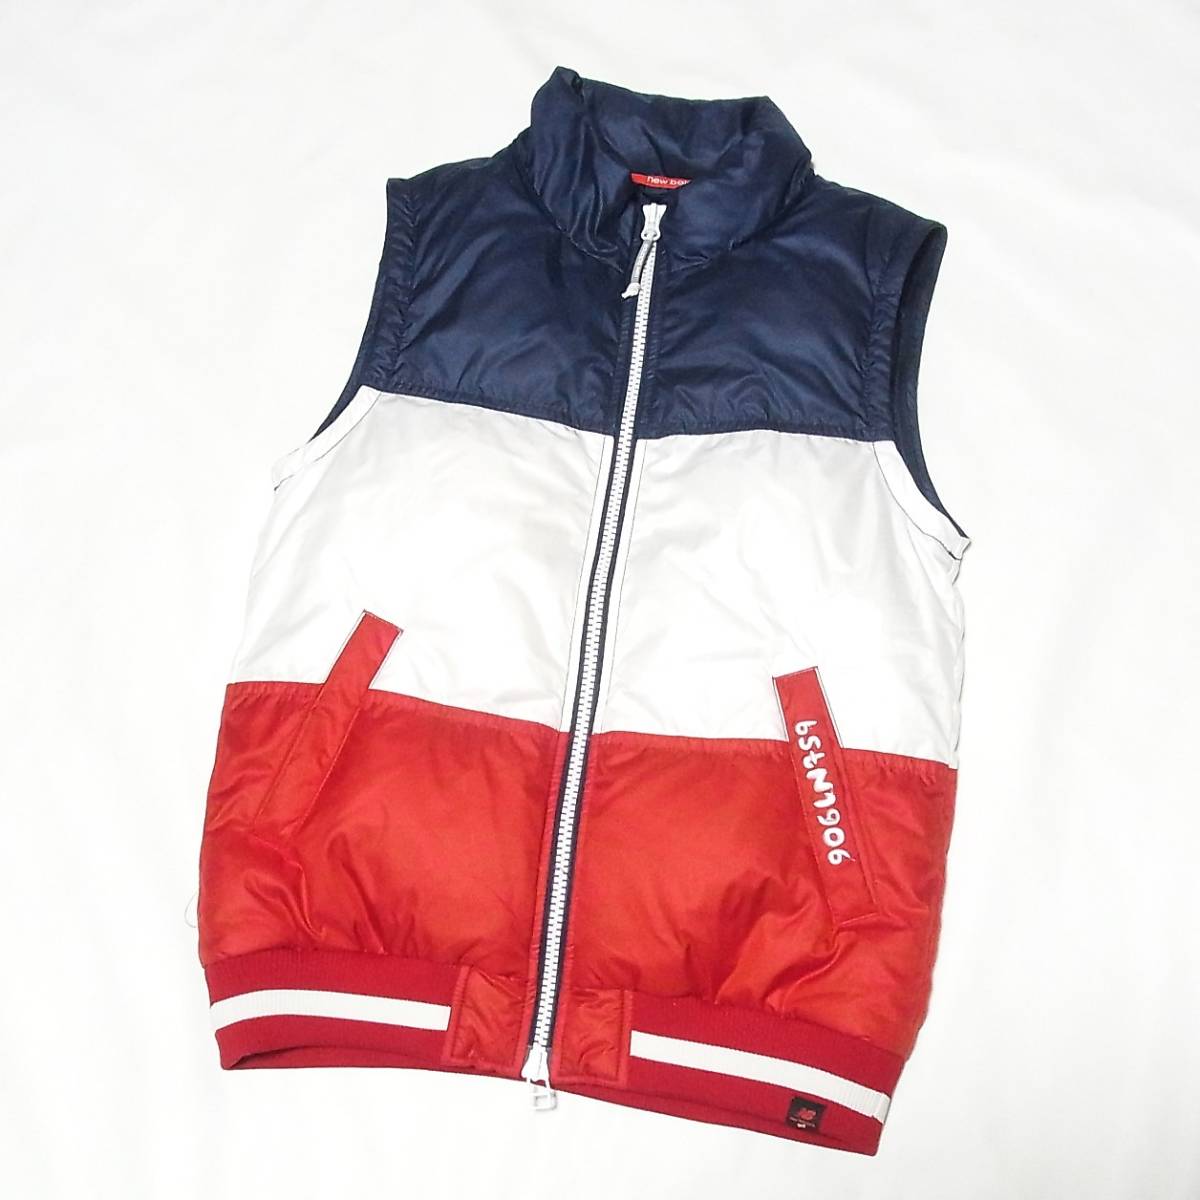  beautiful goods New Balance GOLF tricolor 2WAY down jacket size 0* New balance Golf * down vest * cleaning settled 